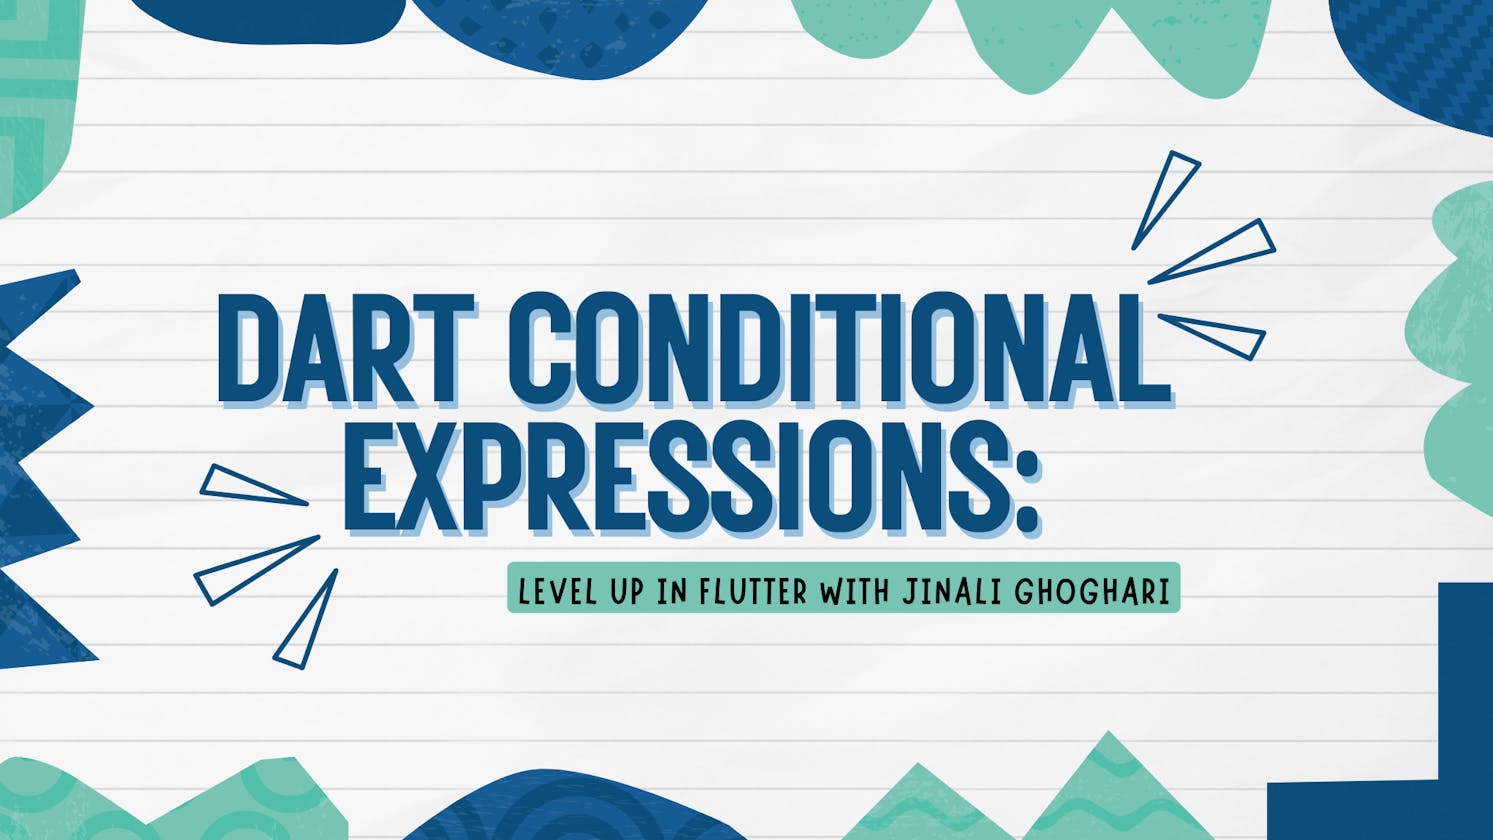 Dart Conditional Expressions: